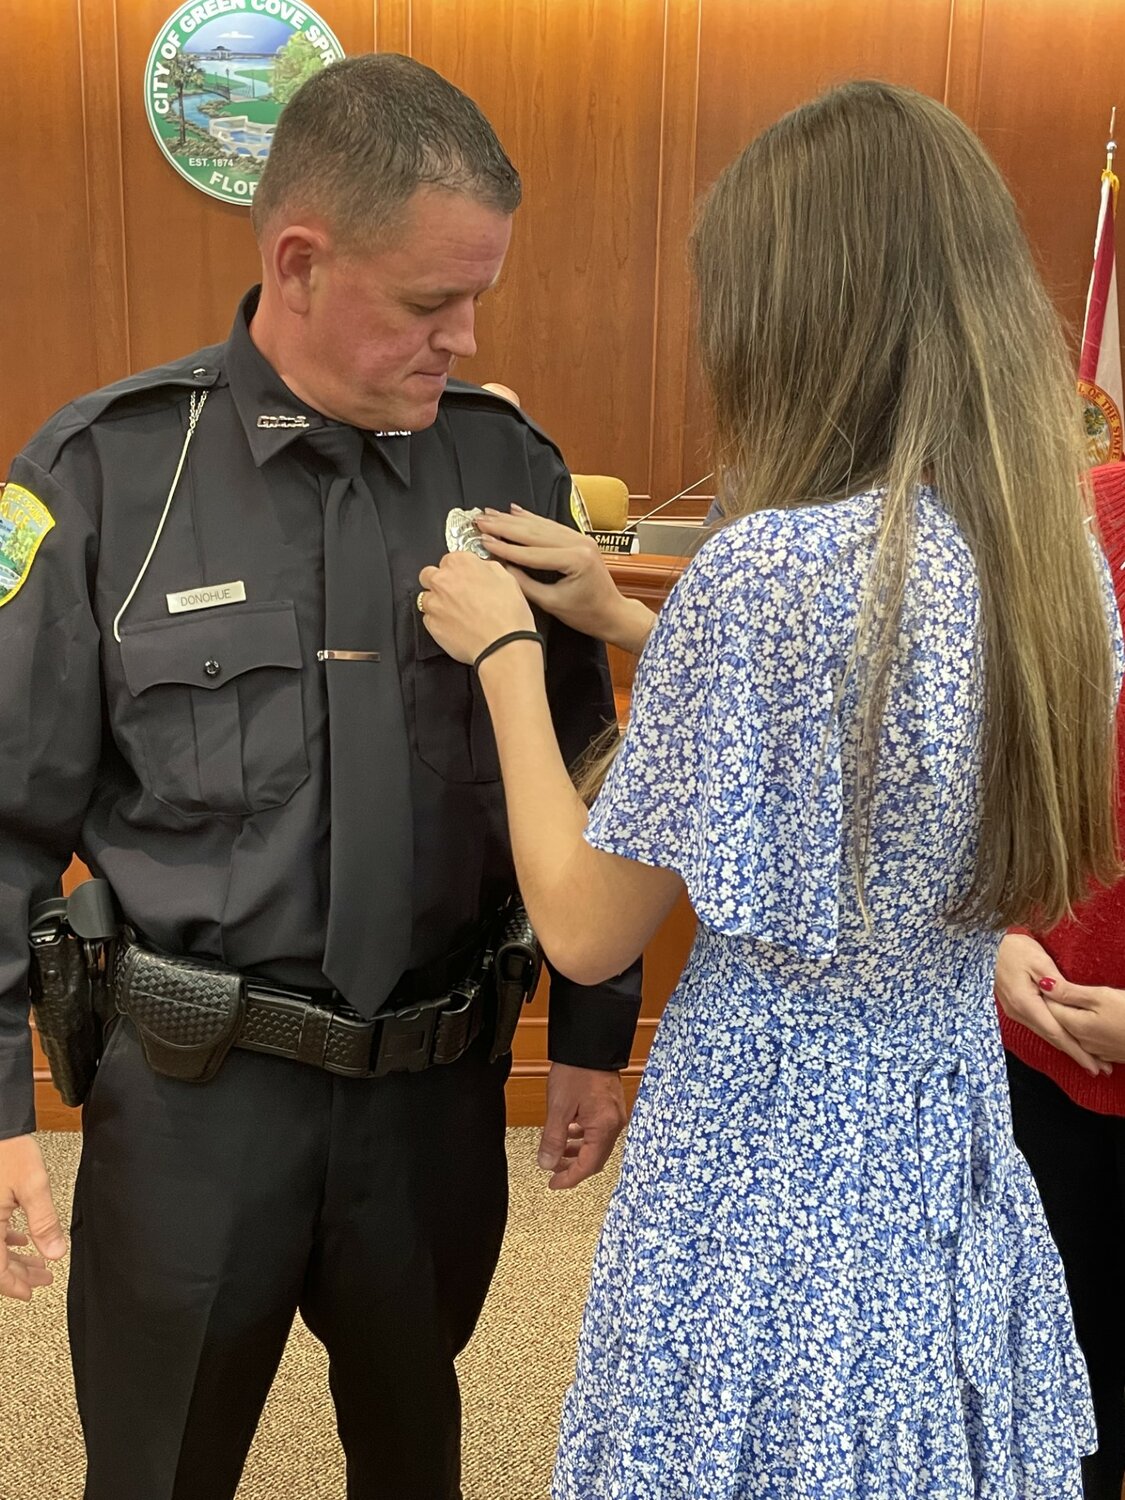 Stephen Donohue was sworn in as a part-time police officer. His daughter pinned his badge on for the first time. Donohue was a recipient of the Medal for Valor during his tenure serving the New York City Police Department.